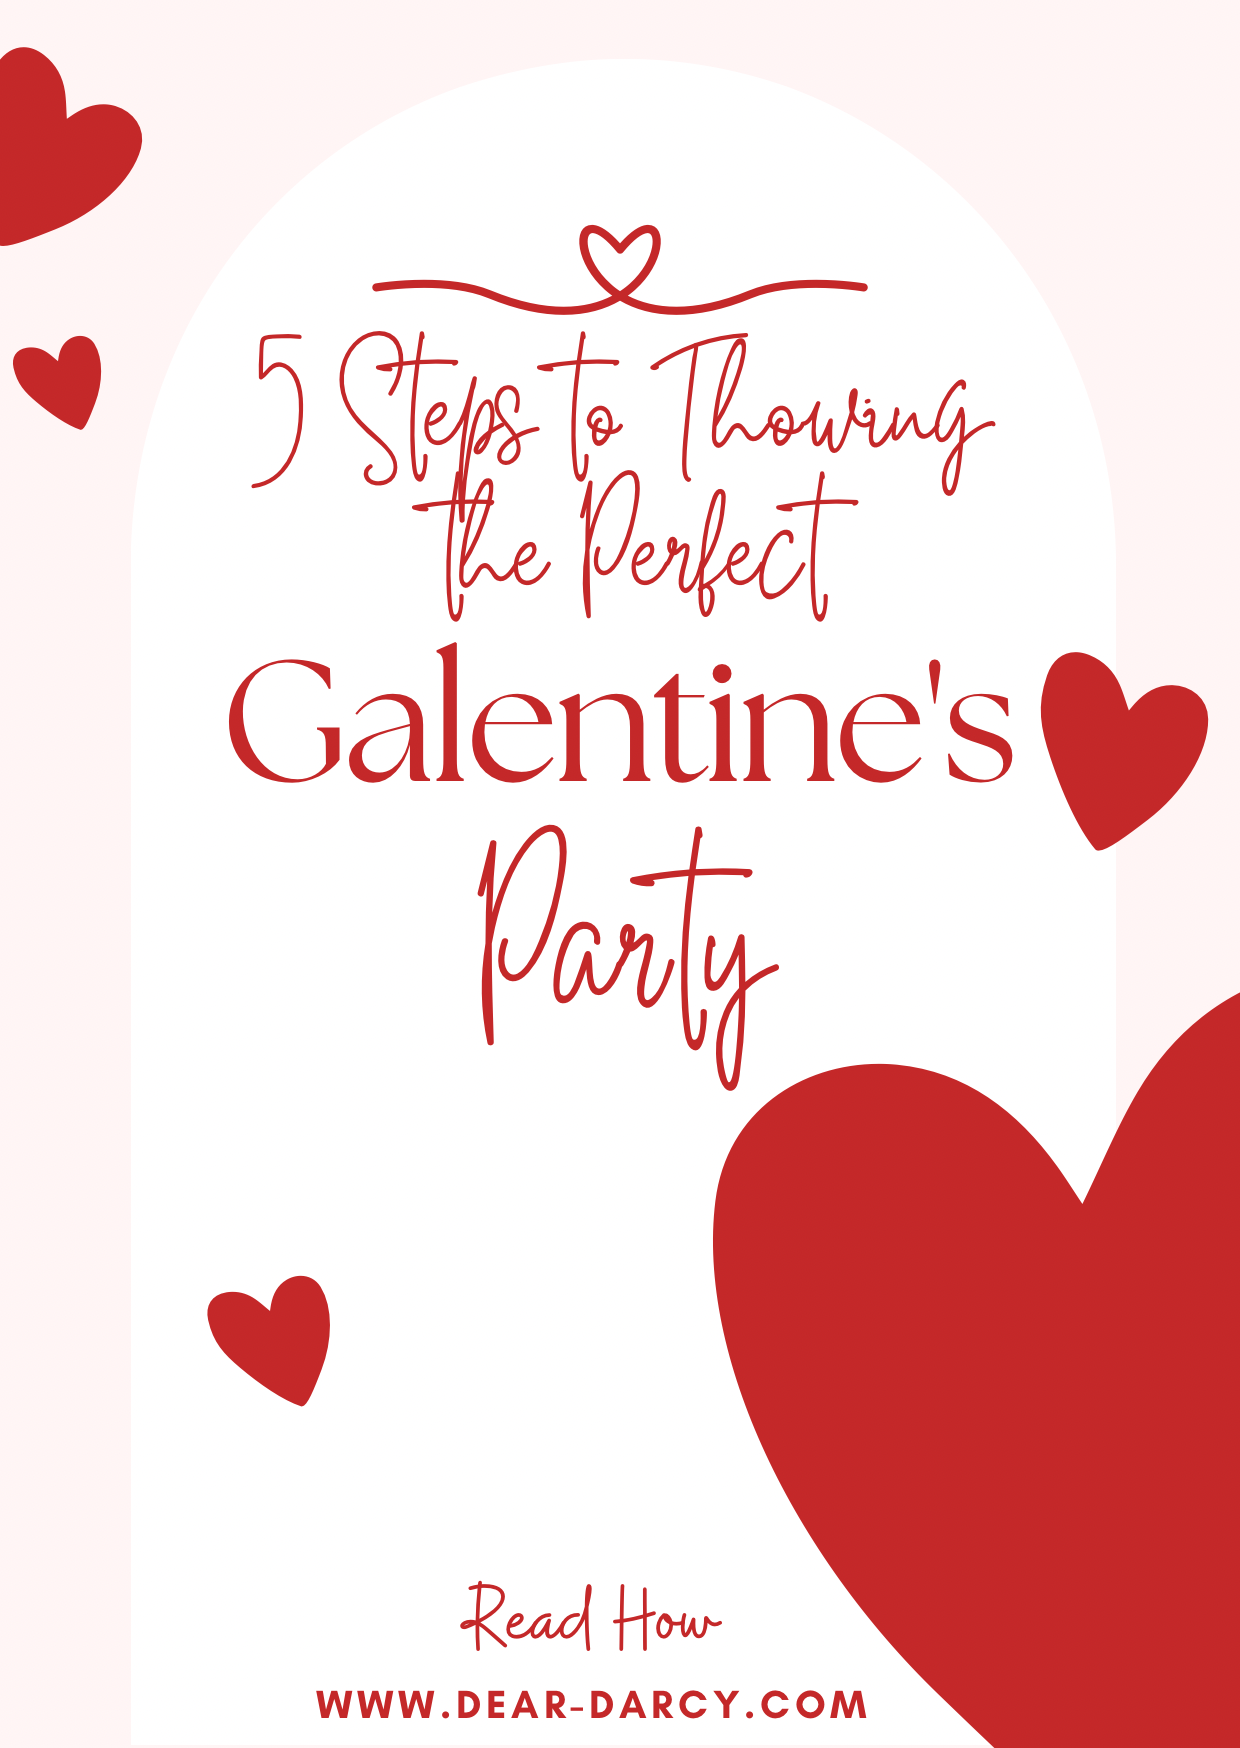 5 Steps to Throwing the Perfect Galentines